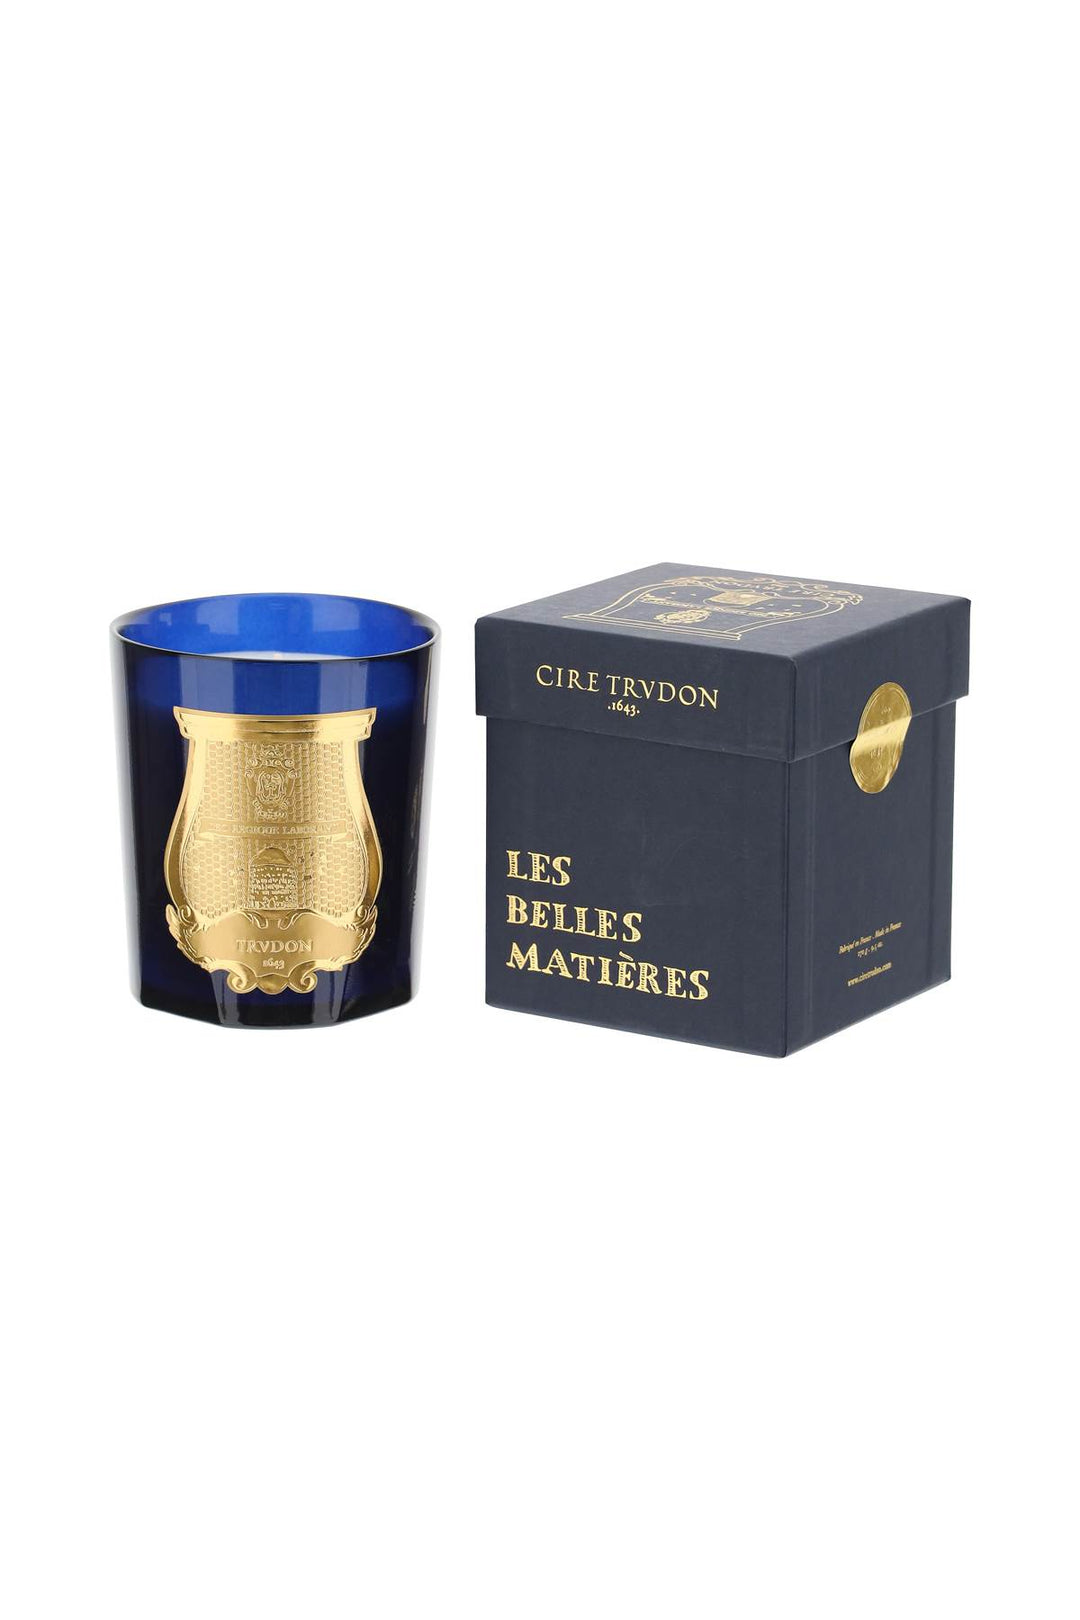 Cire trvdon madurai scented candle 270 gr-2